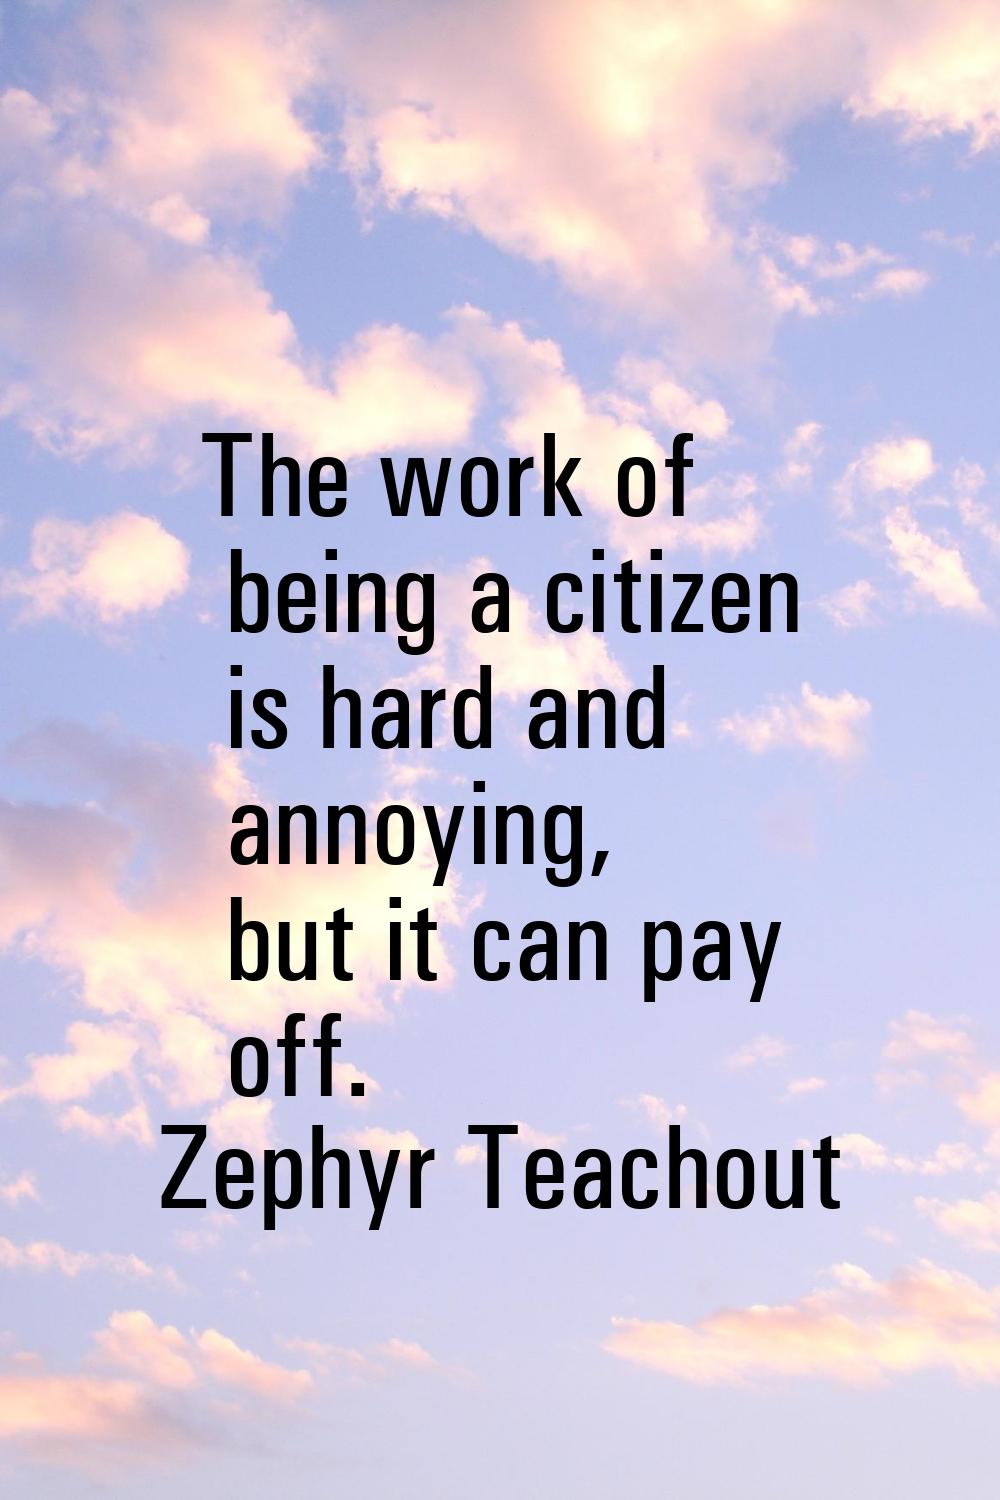 The work of being a citizen is hard and annoying, but it can pay off.